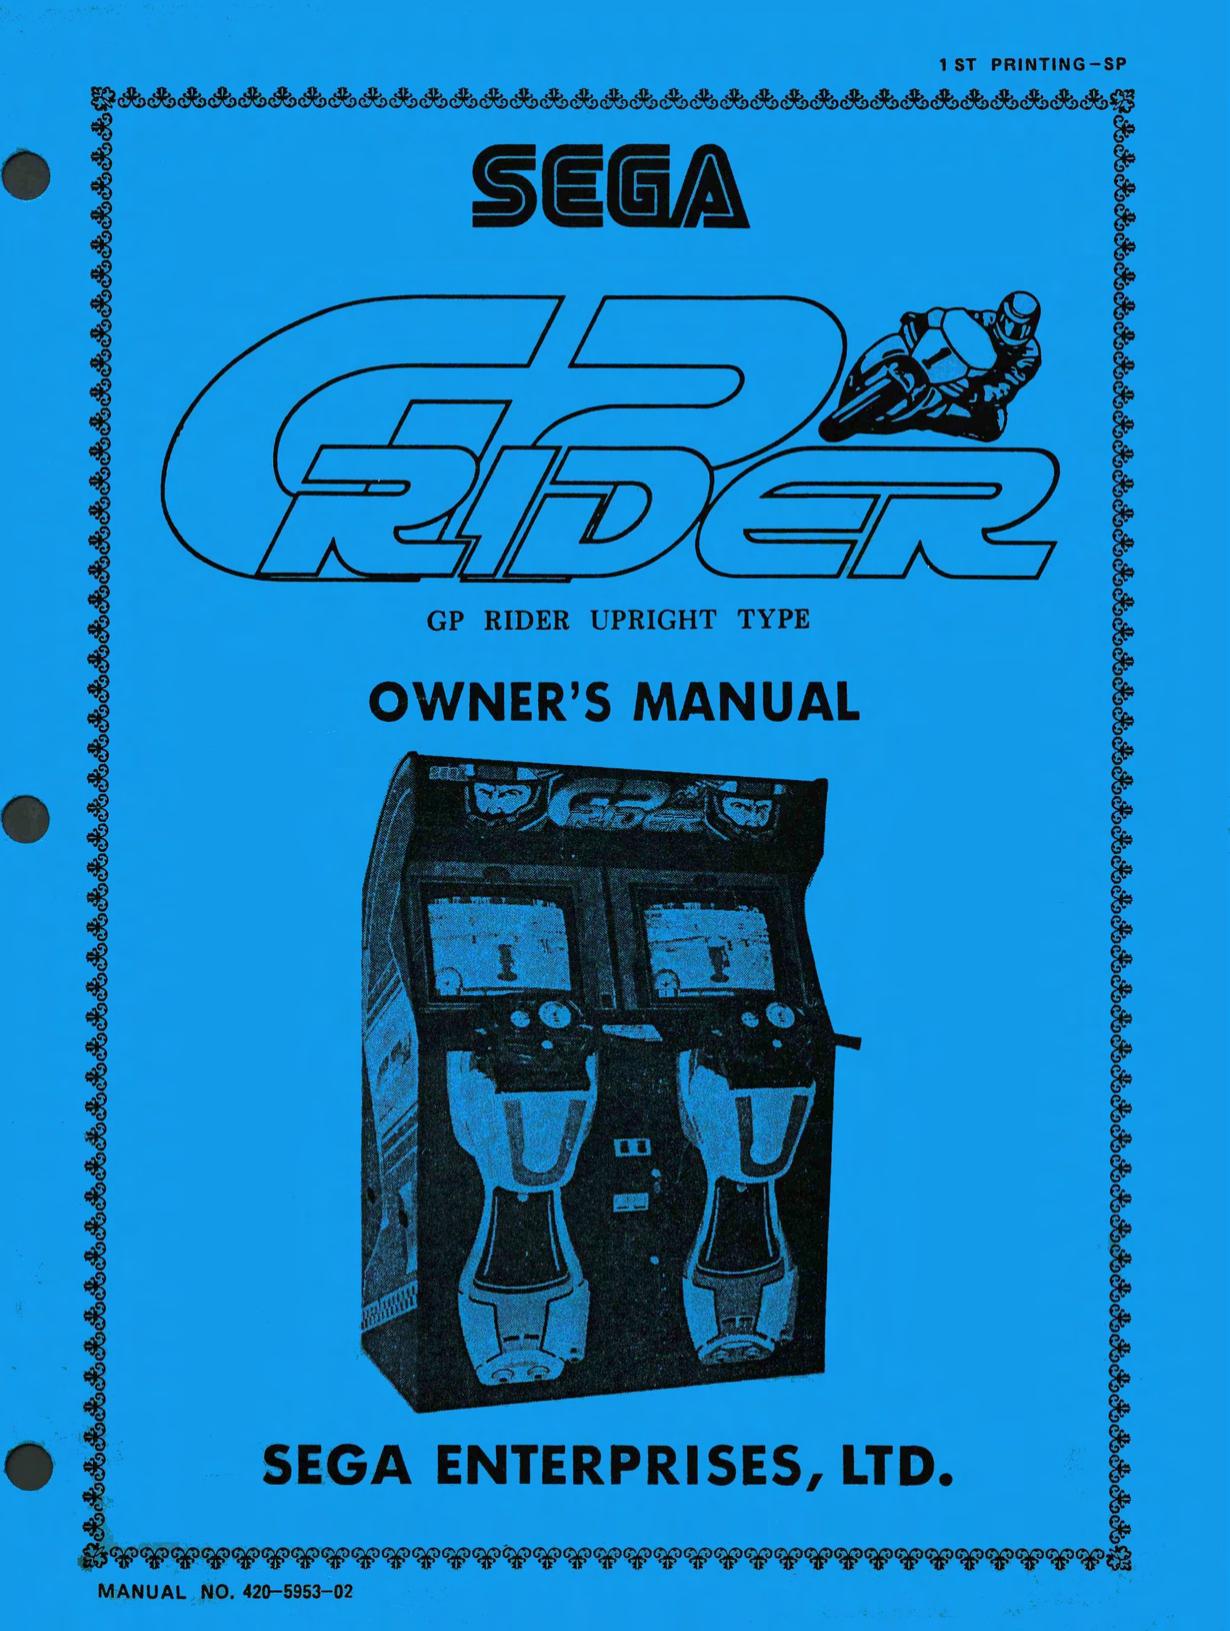 GP Rider Upright Type Owners Manual 1st Printing SP (420-5953-02)